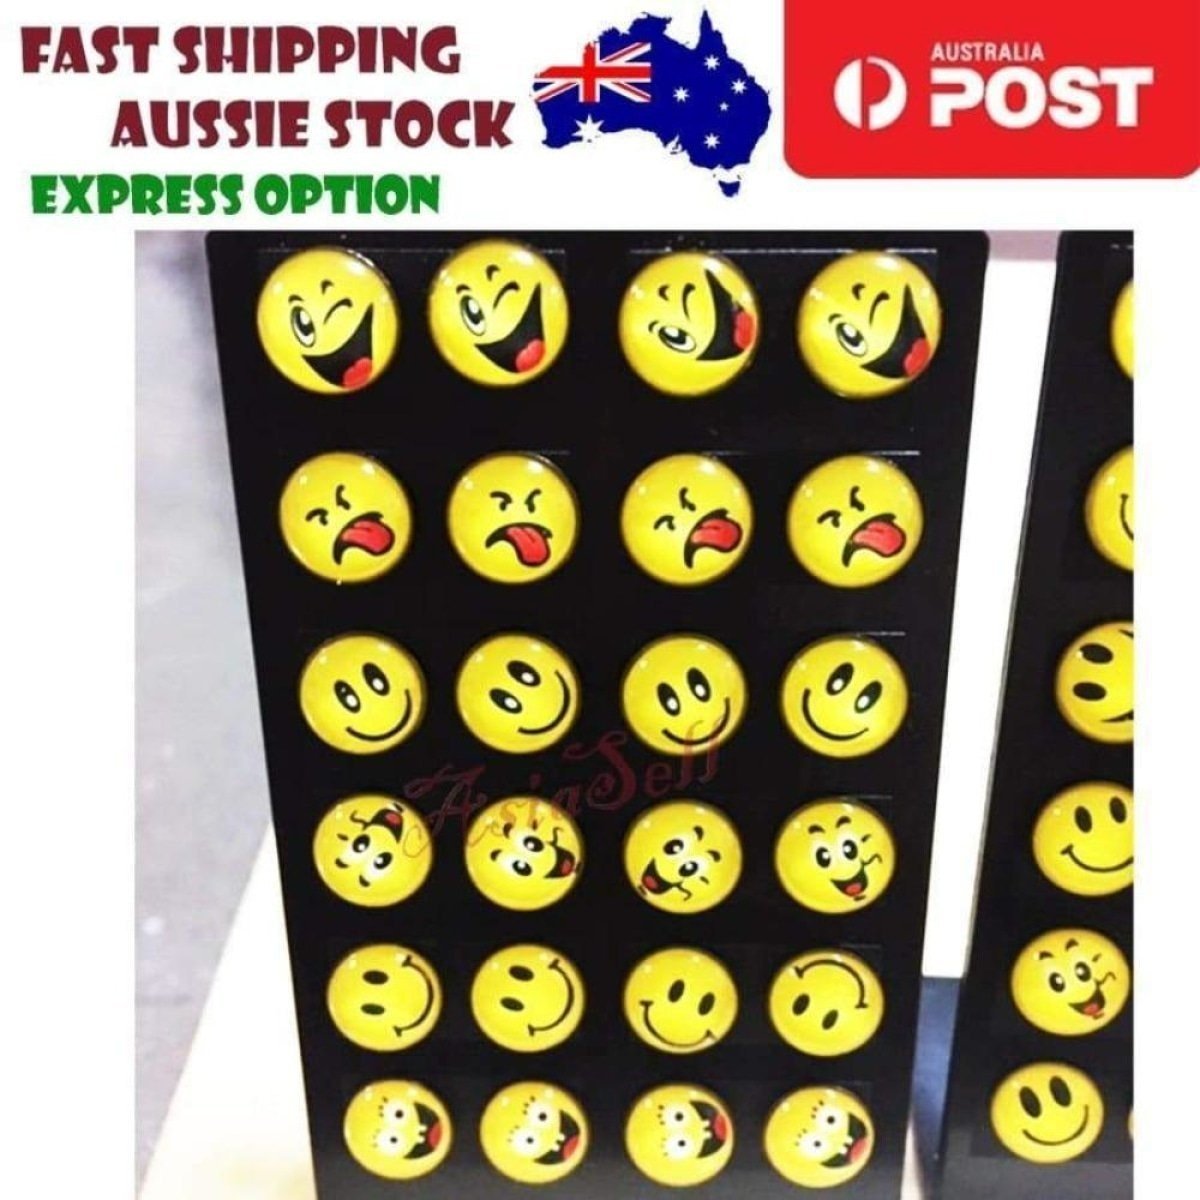 12 Pairs Cute Emoticon Smiley Face Furry Stud Earring Girls Fur Ball Earrings - Smiley 2 - - Asia Sell